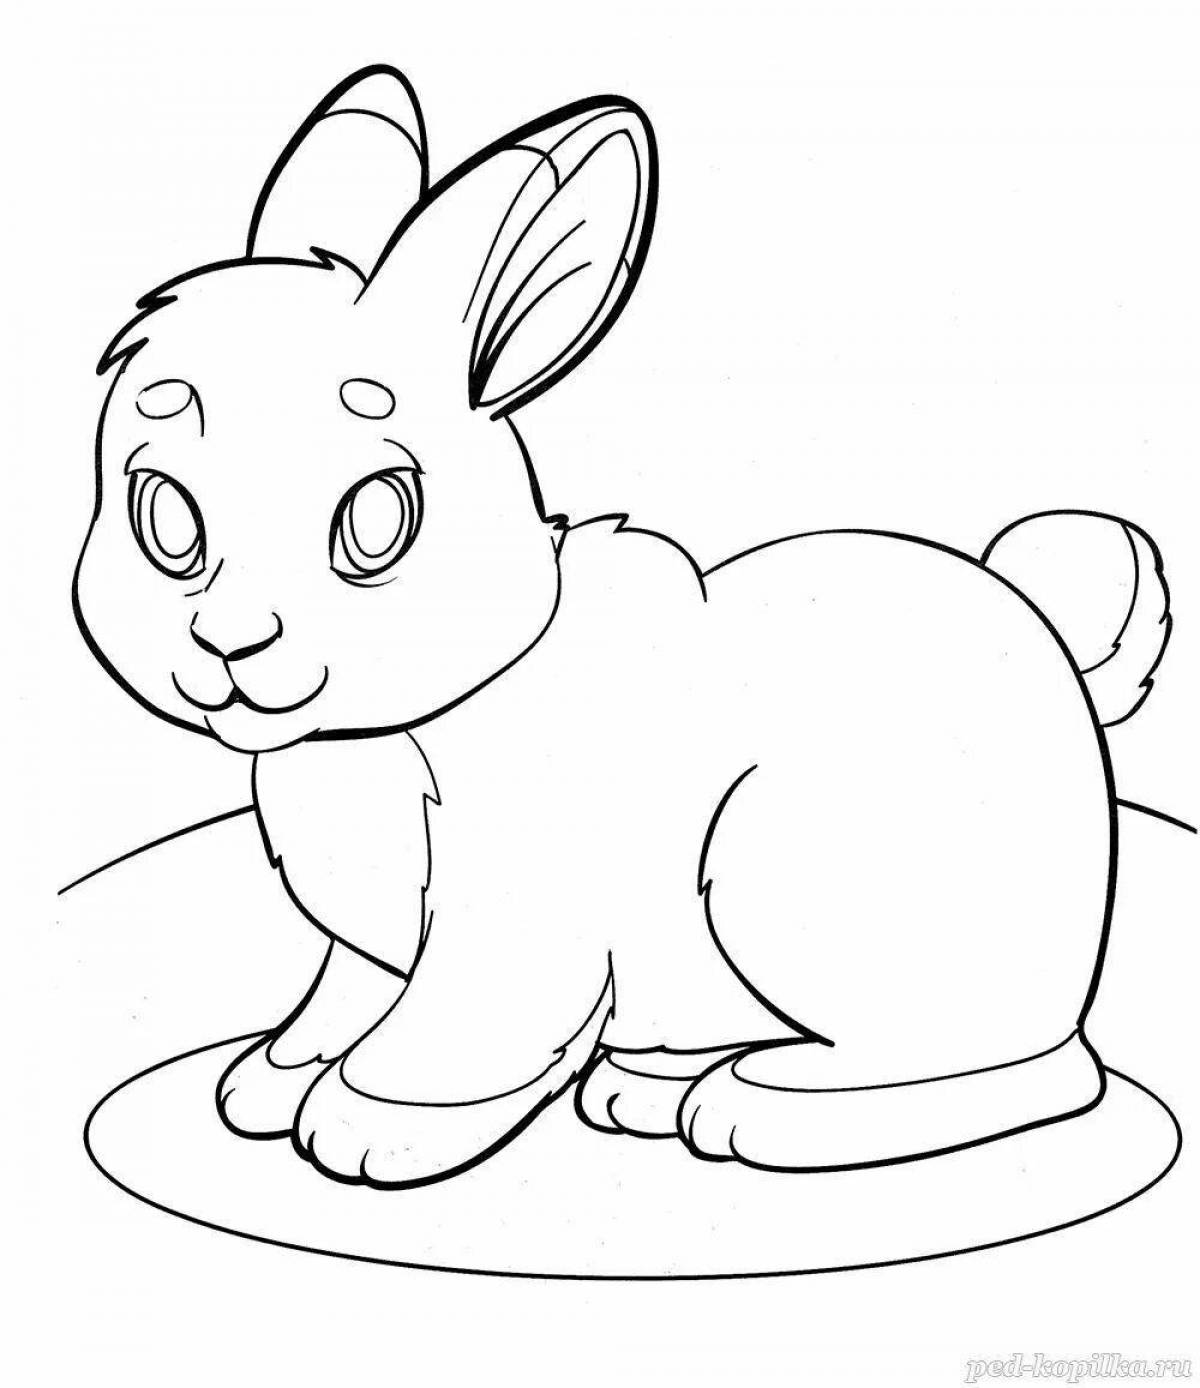 Adorable rabbit coloring book for 6-7 year olds